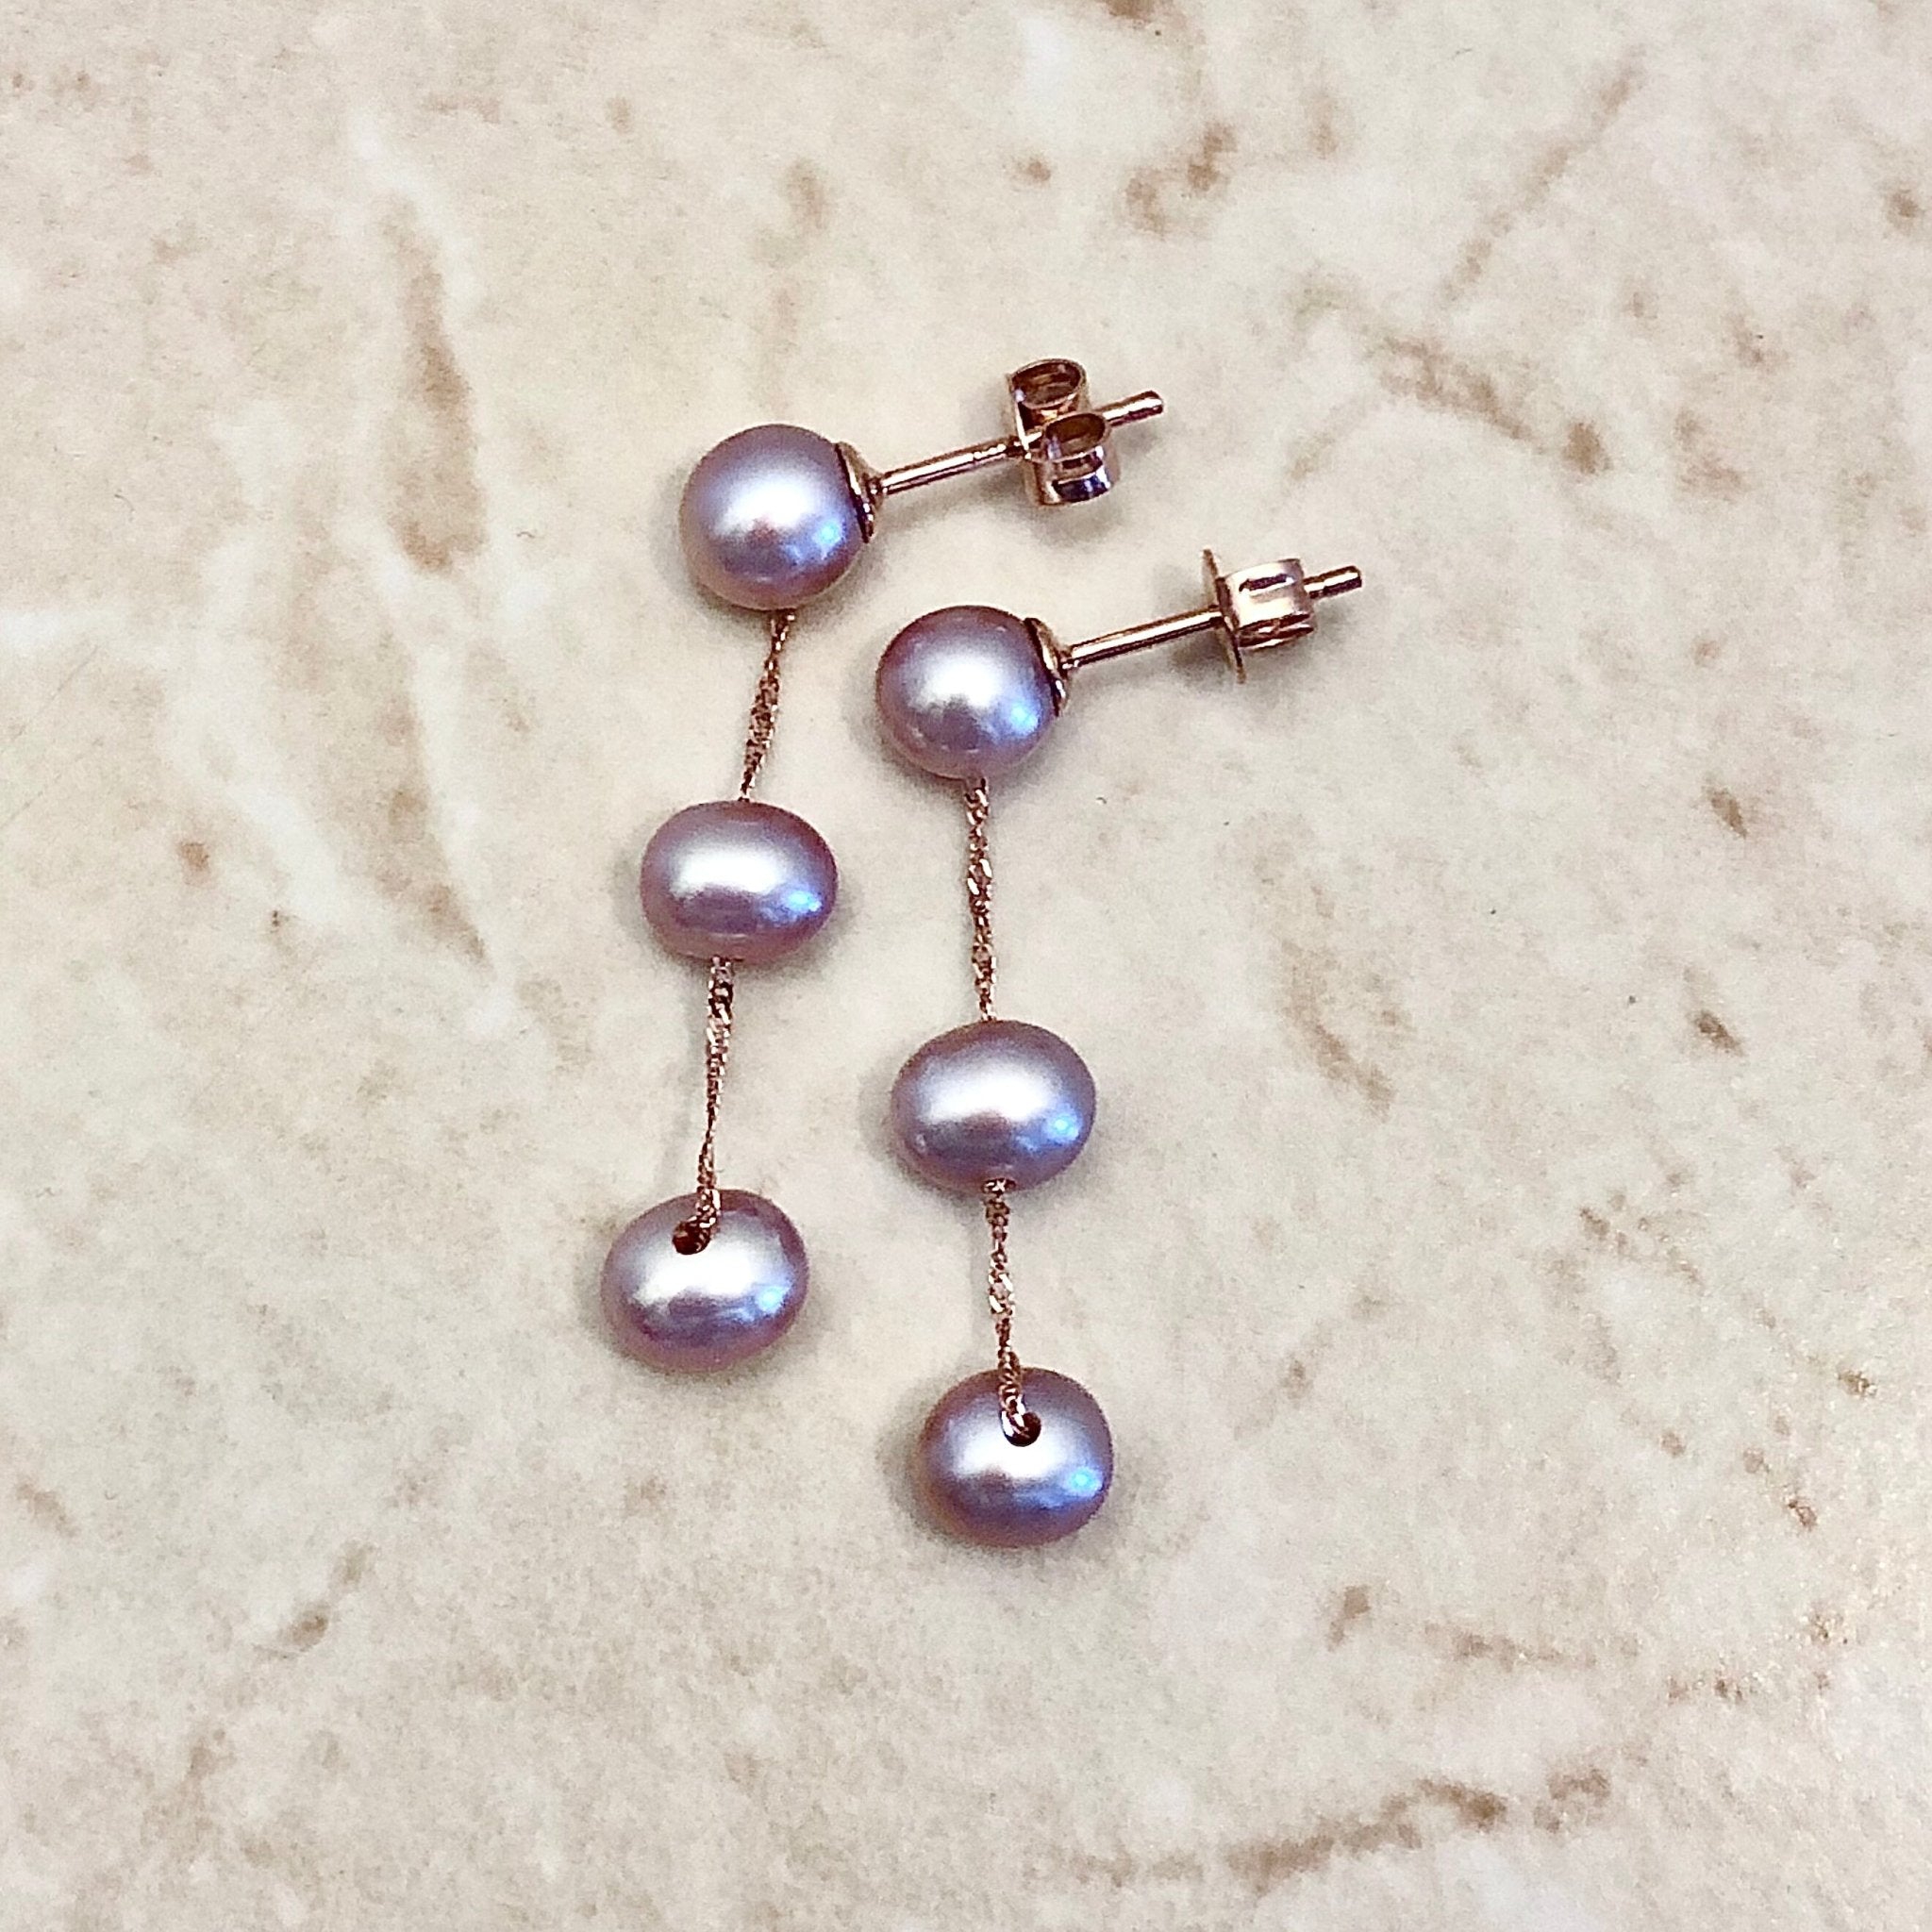 Earrings with Diamonds and Pearls in Rose Gold | KLENOTA